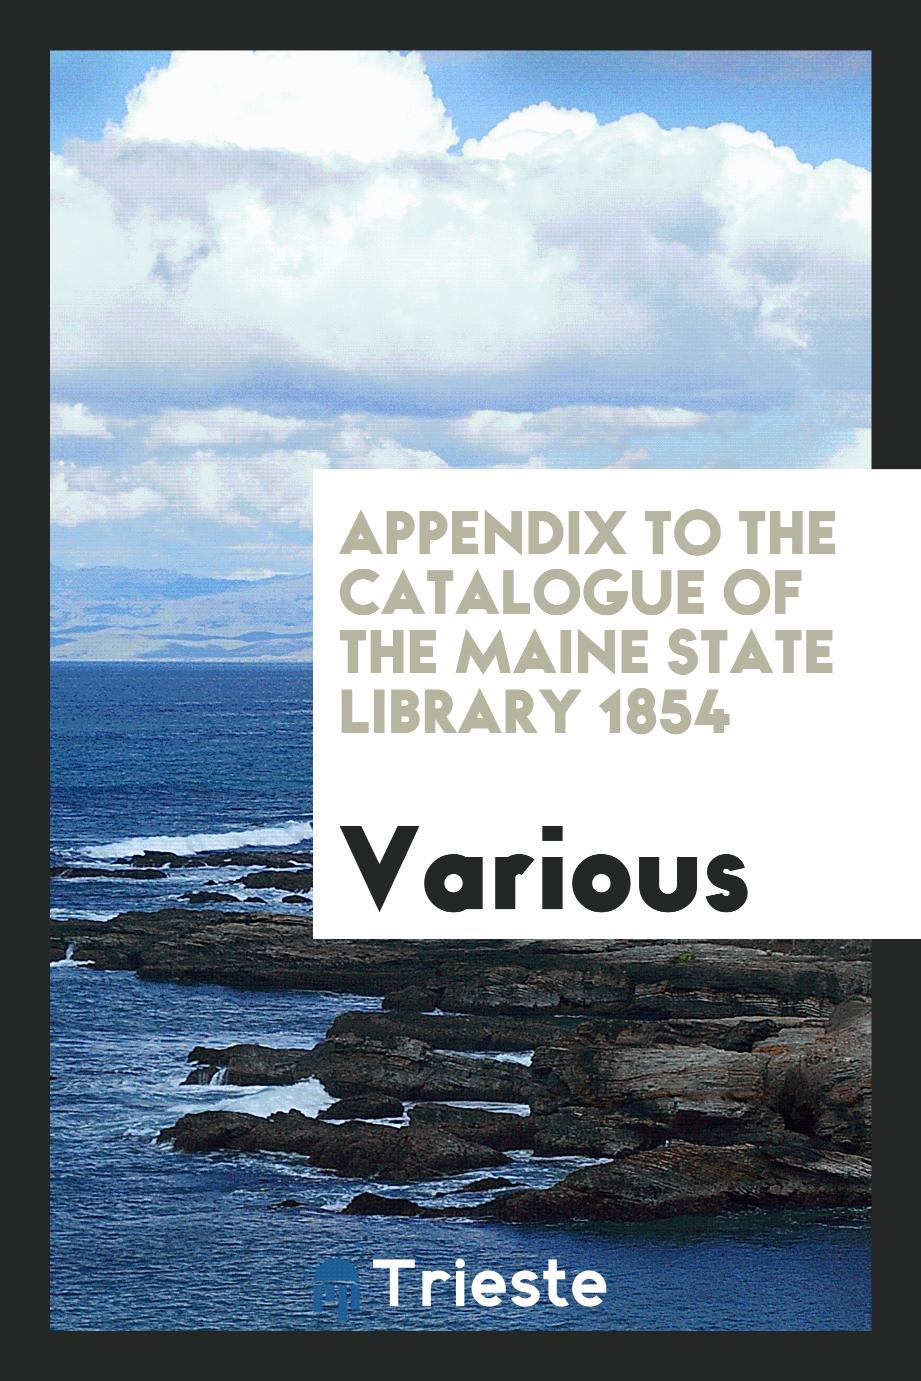 Appendix to the Catalogue of the Maine State Library 1854